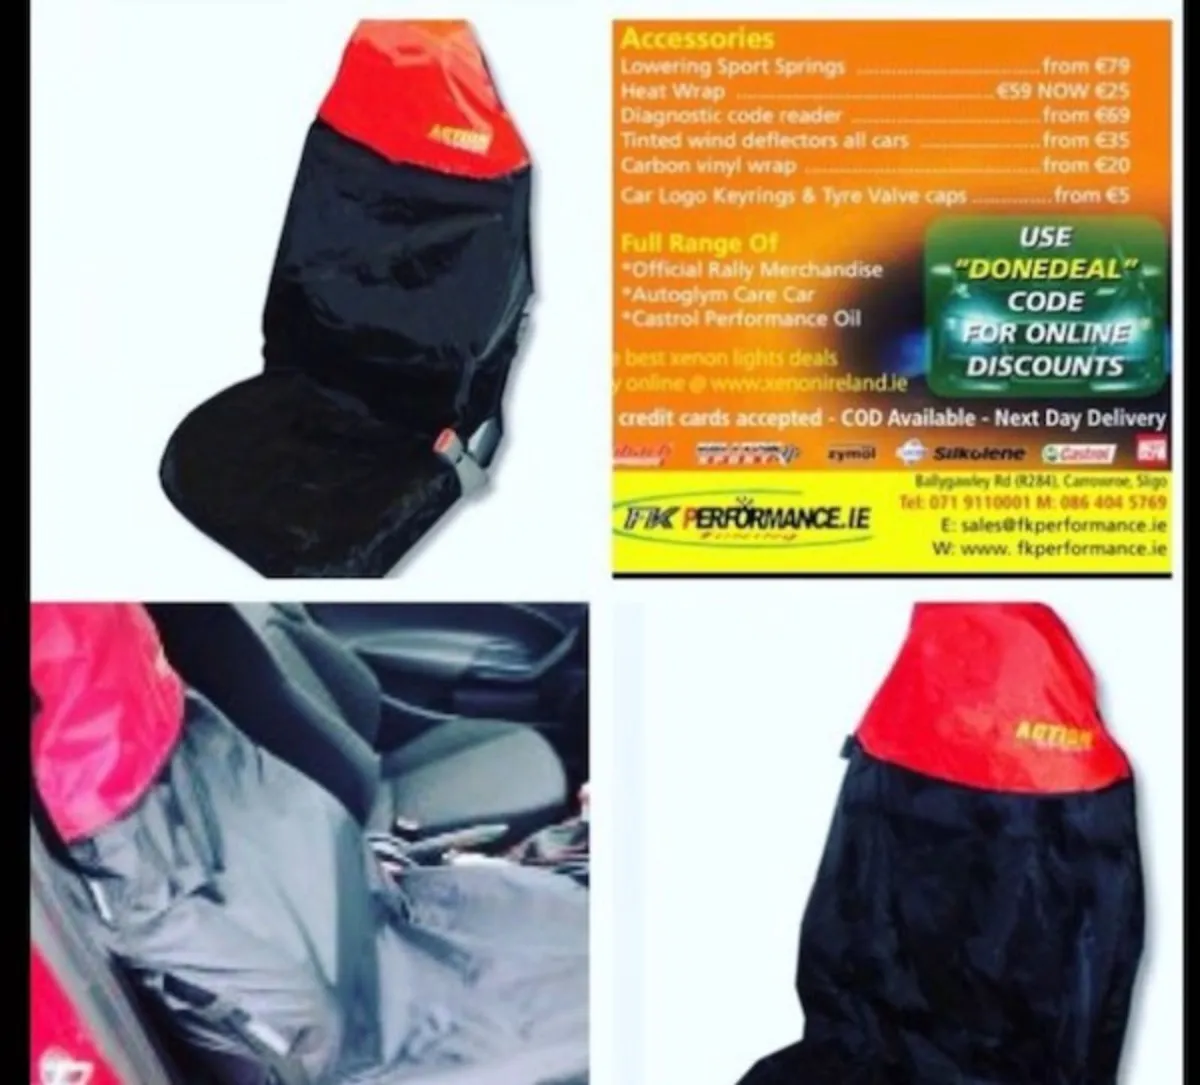 Action sport seat covers waterproof offer - Image 1